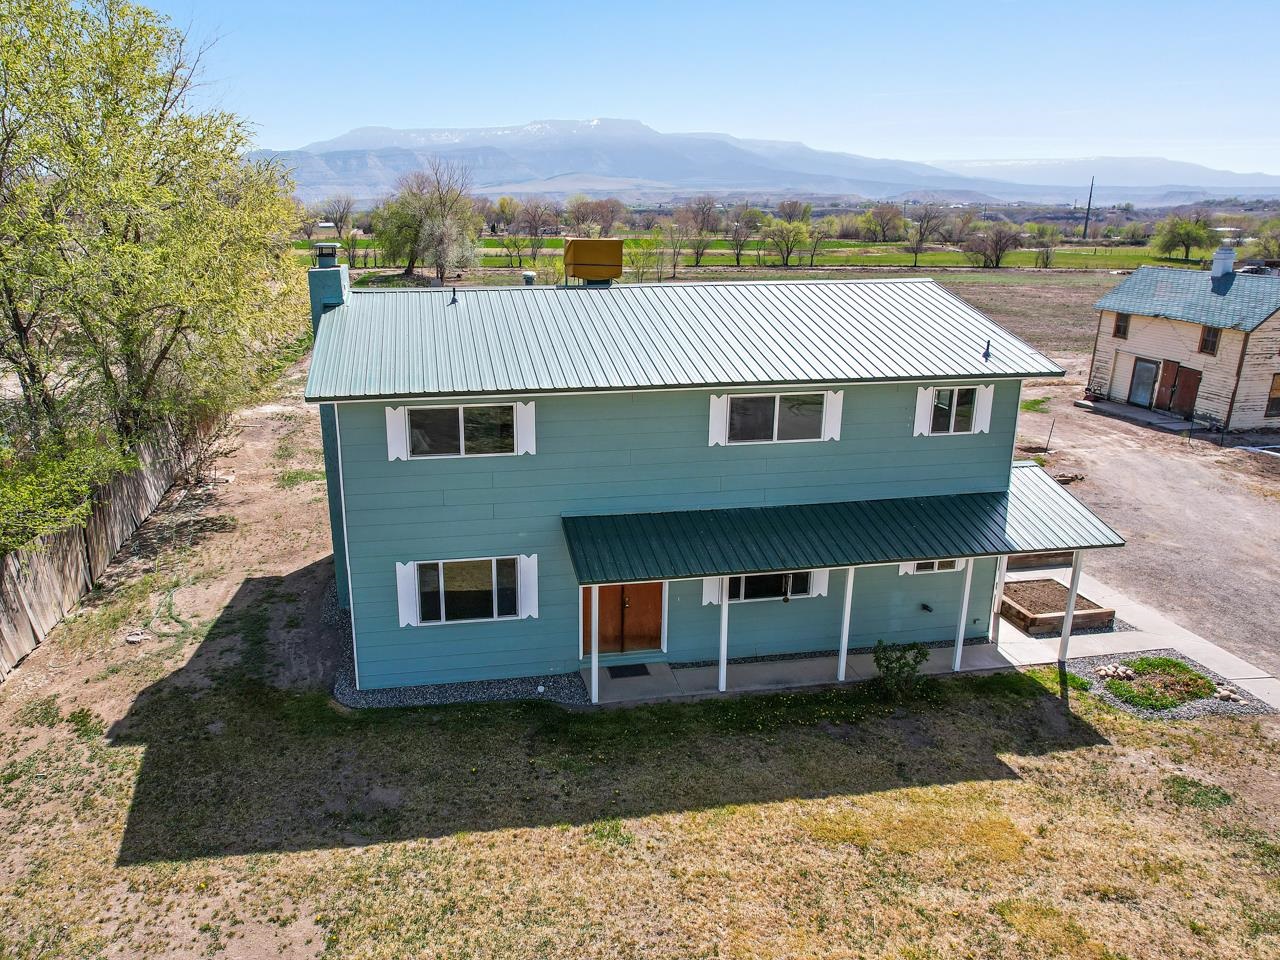 What a unique property with a nicely updated home on nearly 5 acres of land with irrigation! This area is zoned Residential Multi-Family and AFT, so could potentially be subdivided and built on. The views of the Grand Mesa, Uncompahgre Plateau, and Mt Garfield are incredible from this Grand Valley property. Tucked off 33 Rd, this home has an incredible amount of room inside and plenty of update throughout! Close to schools, amenities, Grand Junction, Clifton, and Palisade, there is plenty to do in the local area. As for the existing home, downstairs you'll find the main living spaces with a stunning brick fireplace, updated bathroom and a bedroom. The vinyl plank flooring was just installed and looks fantastic, and both a new front door and sliding glass door will be installed this month. Upstairs you’ll find three conforming bedrooms and two additional rooms that could be non-conforming bedrooms or bonus living spaces as well as an additional updated bathroom. The whole interior was just repainted, there has been significant work rewiring and updates to some of the plumbing. The exterior was painted in 2019 when the metal roof was installed and windows were updated. Outside you’ll find the original homestead that is currently used for storage. There are raised garden beds, and of course, the large, irrigated fields (currently leased out for farming). With views and adventure in every direction, this property is ready for new owners or investors to make it their own!